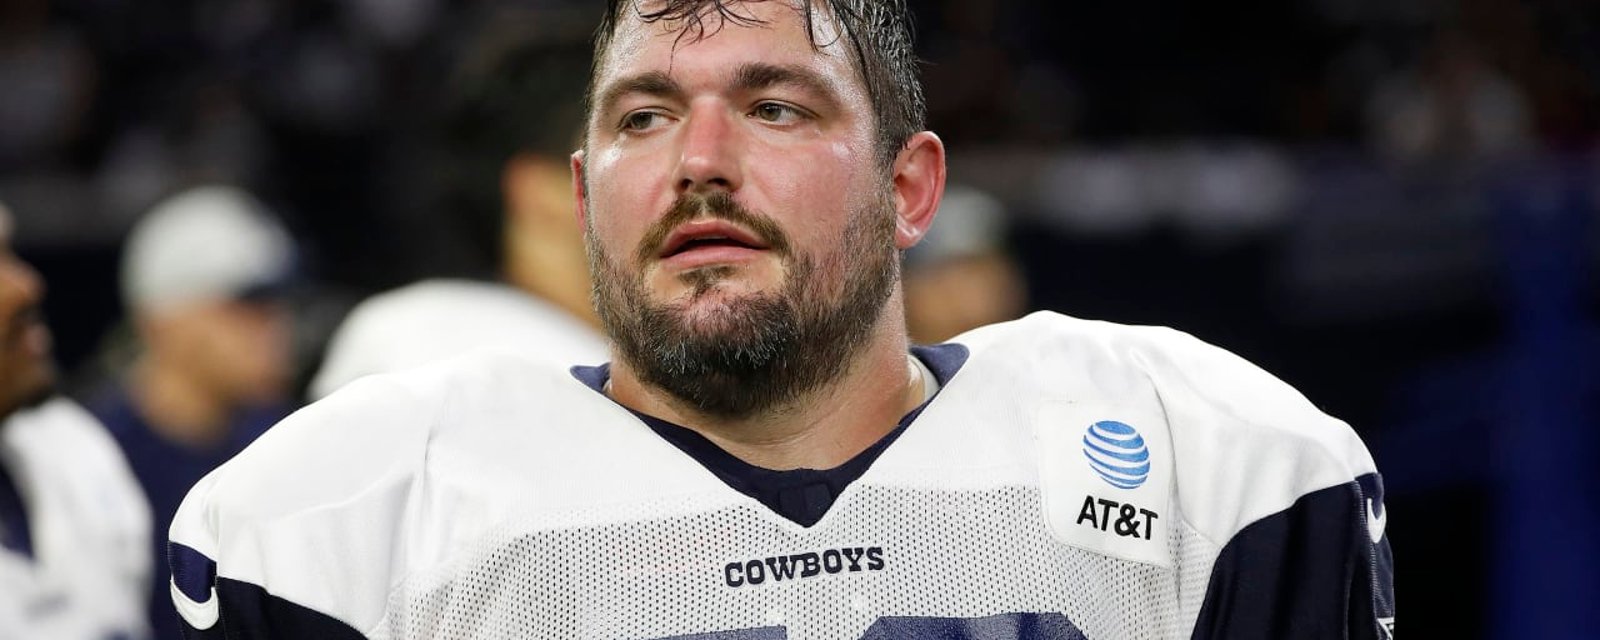 Zack Martin sounds off on his holdout from Cowboys